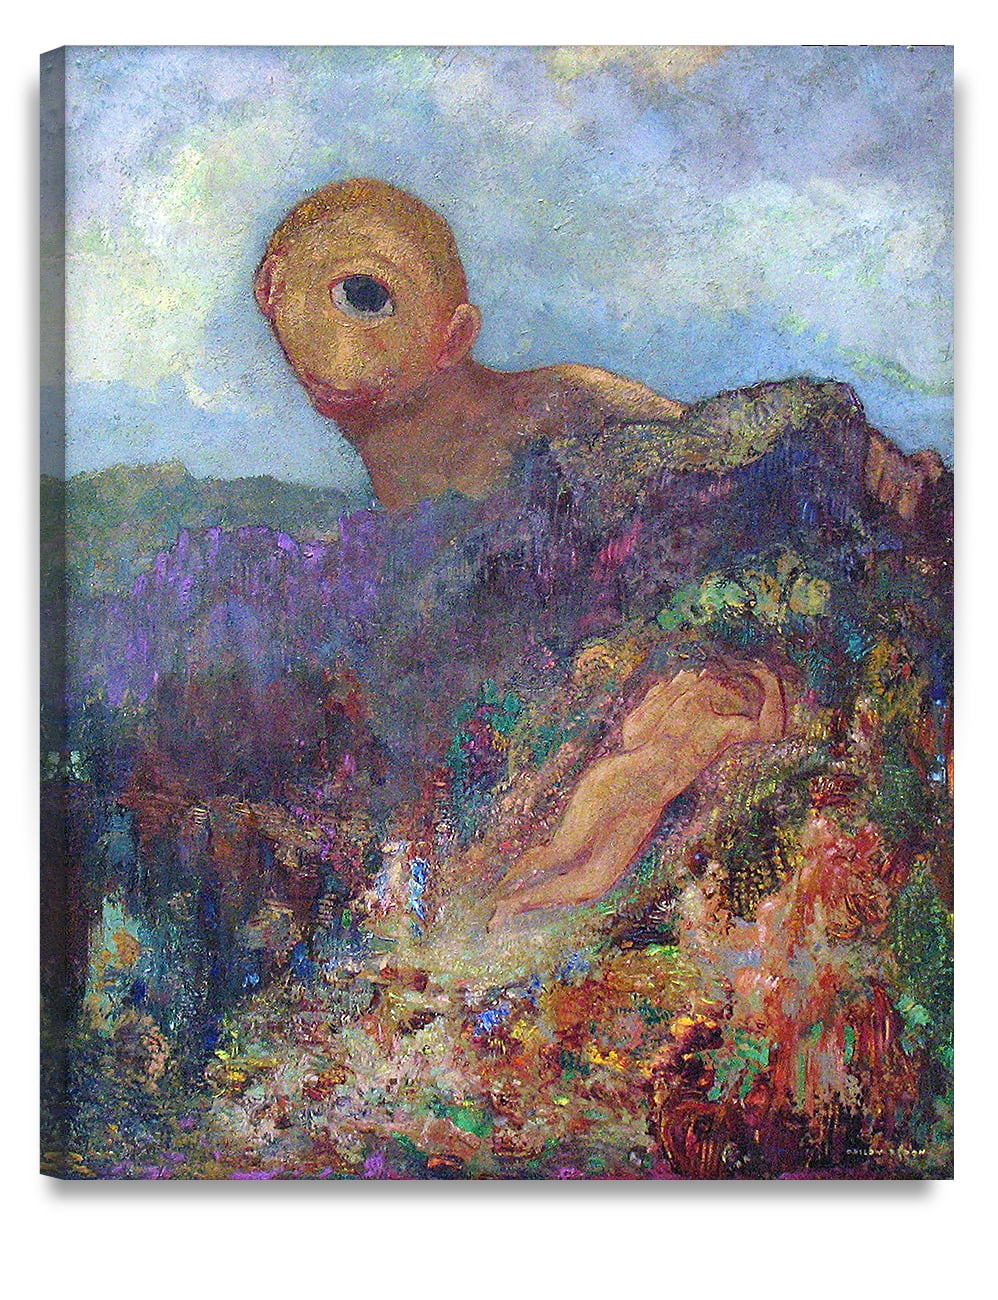 DECORARTS The Cyclops (1914) by Odilon Redon Art Reproduction. Giclee  Prints Acid Free Cotton Canvas Wall Art for Home Decor W 32